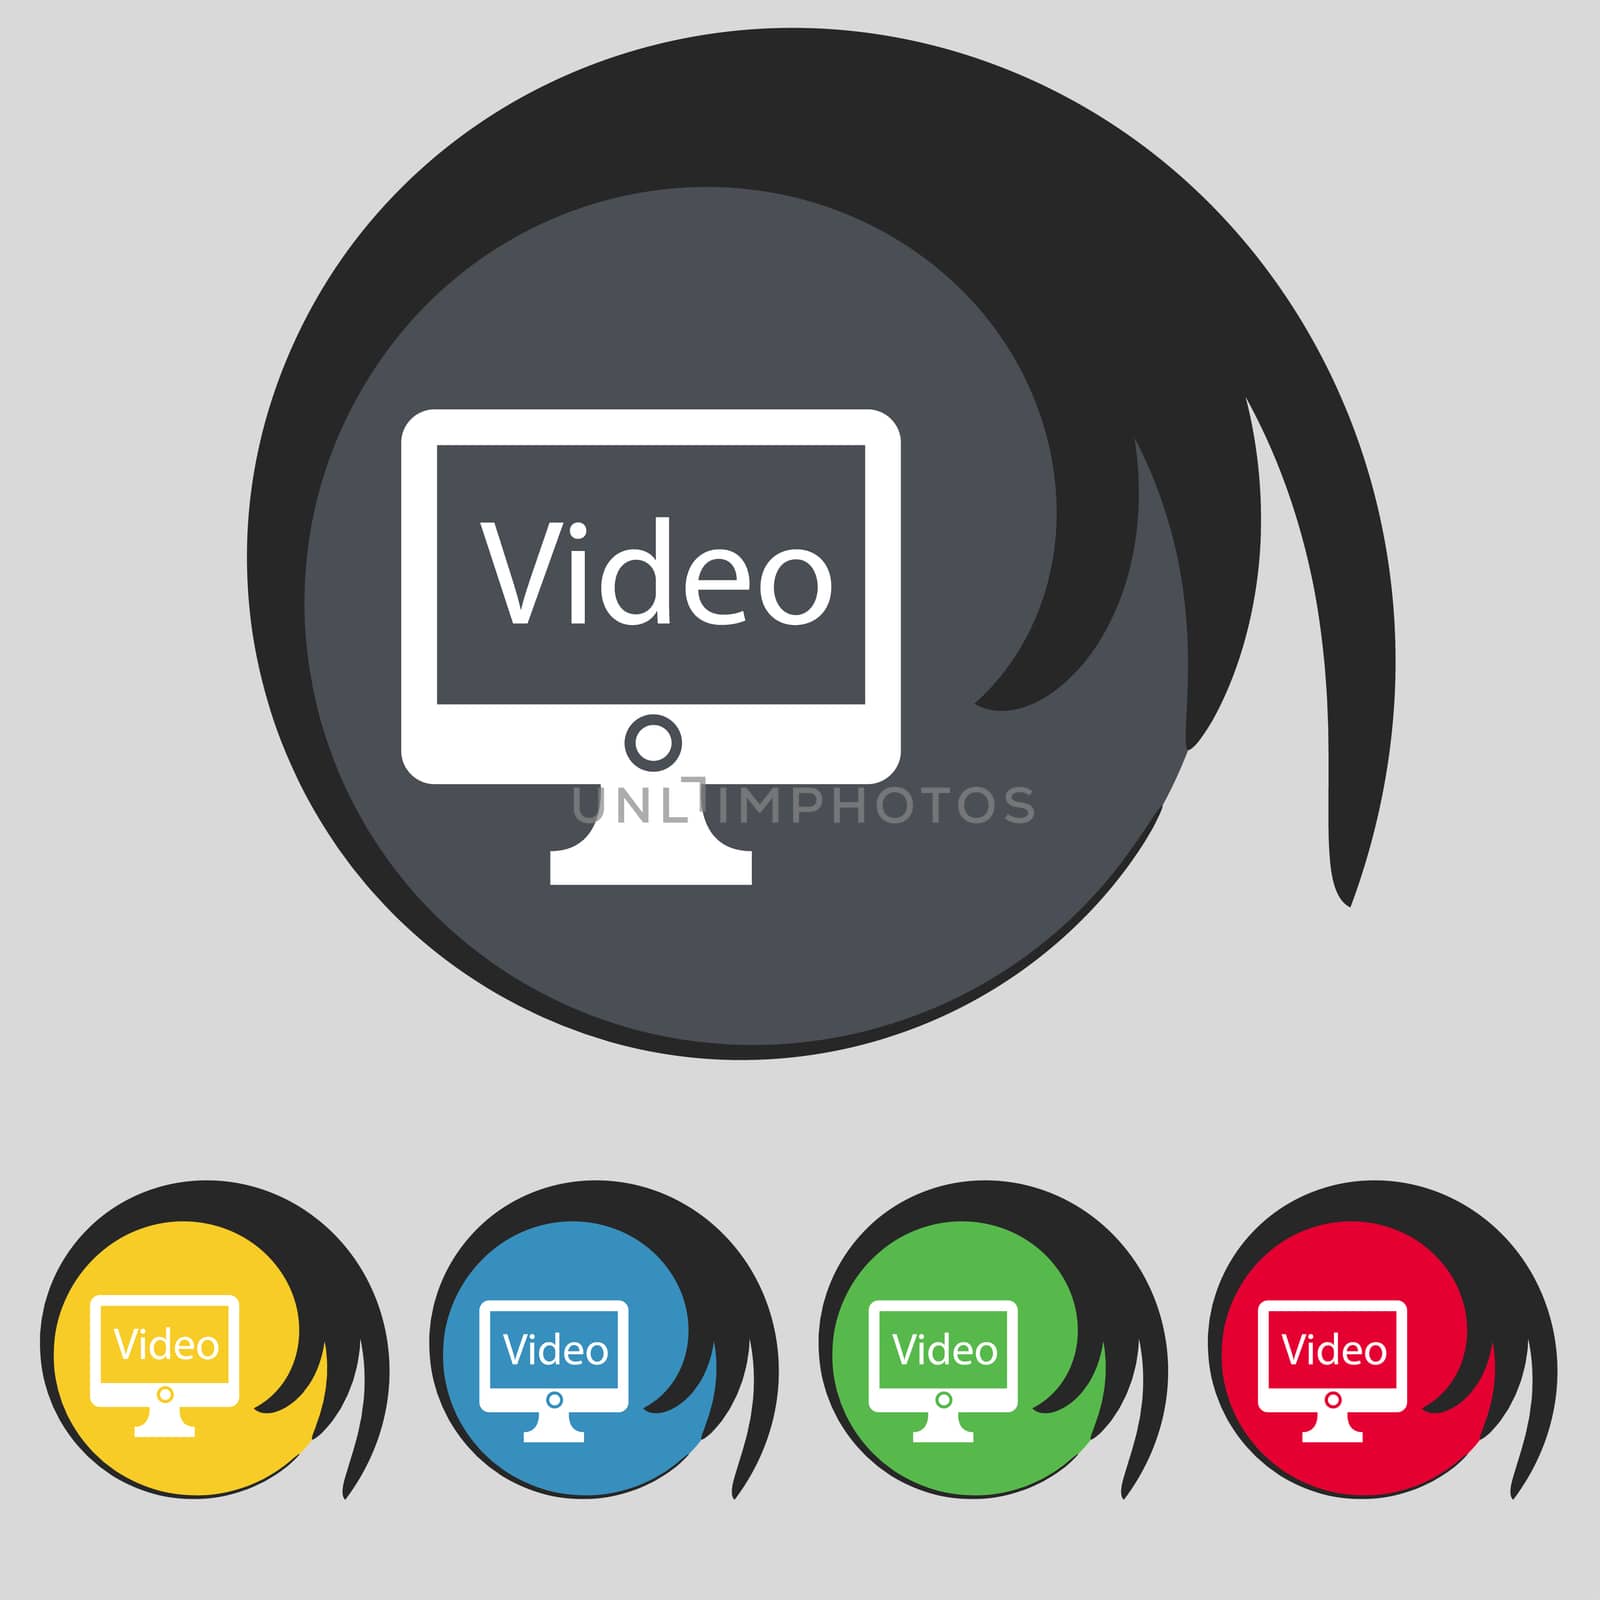 Play video sign icon. Player navigation symbol. Set of colored buttons. illustration